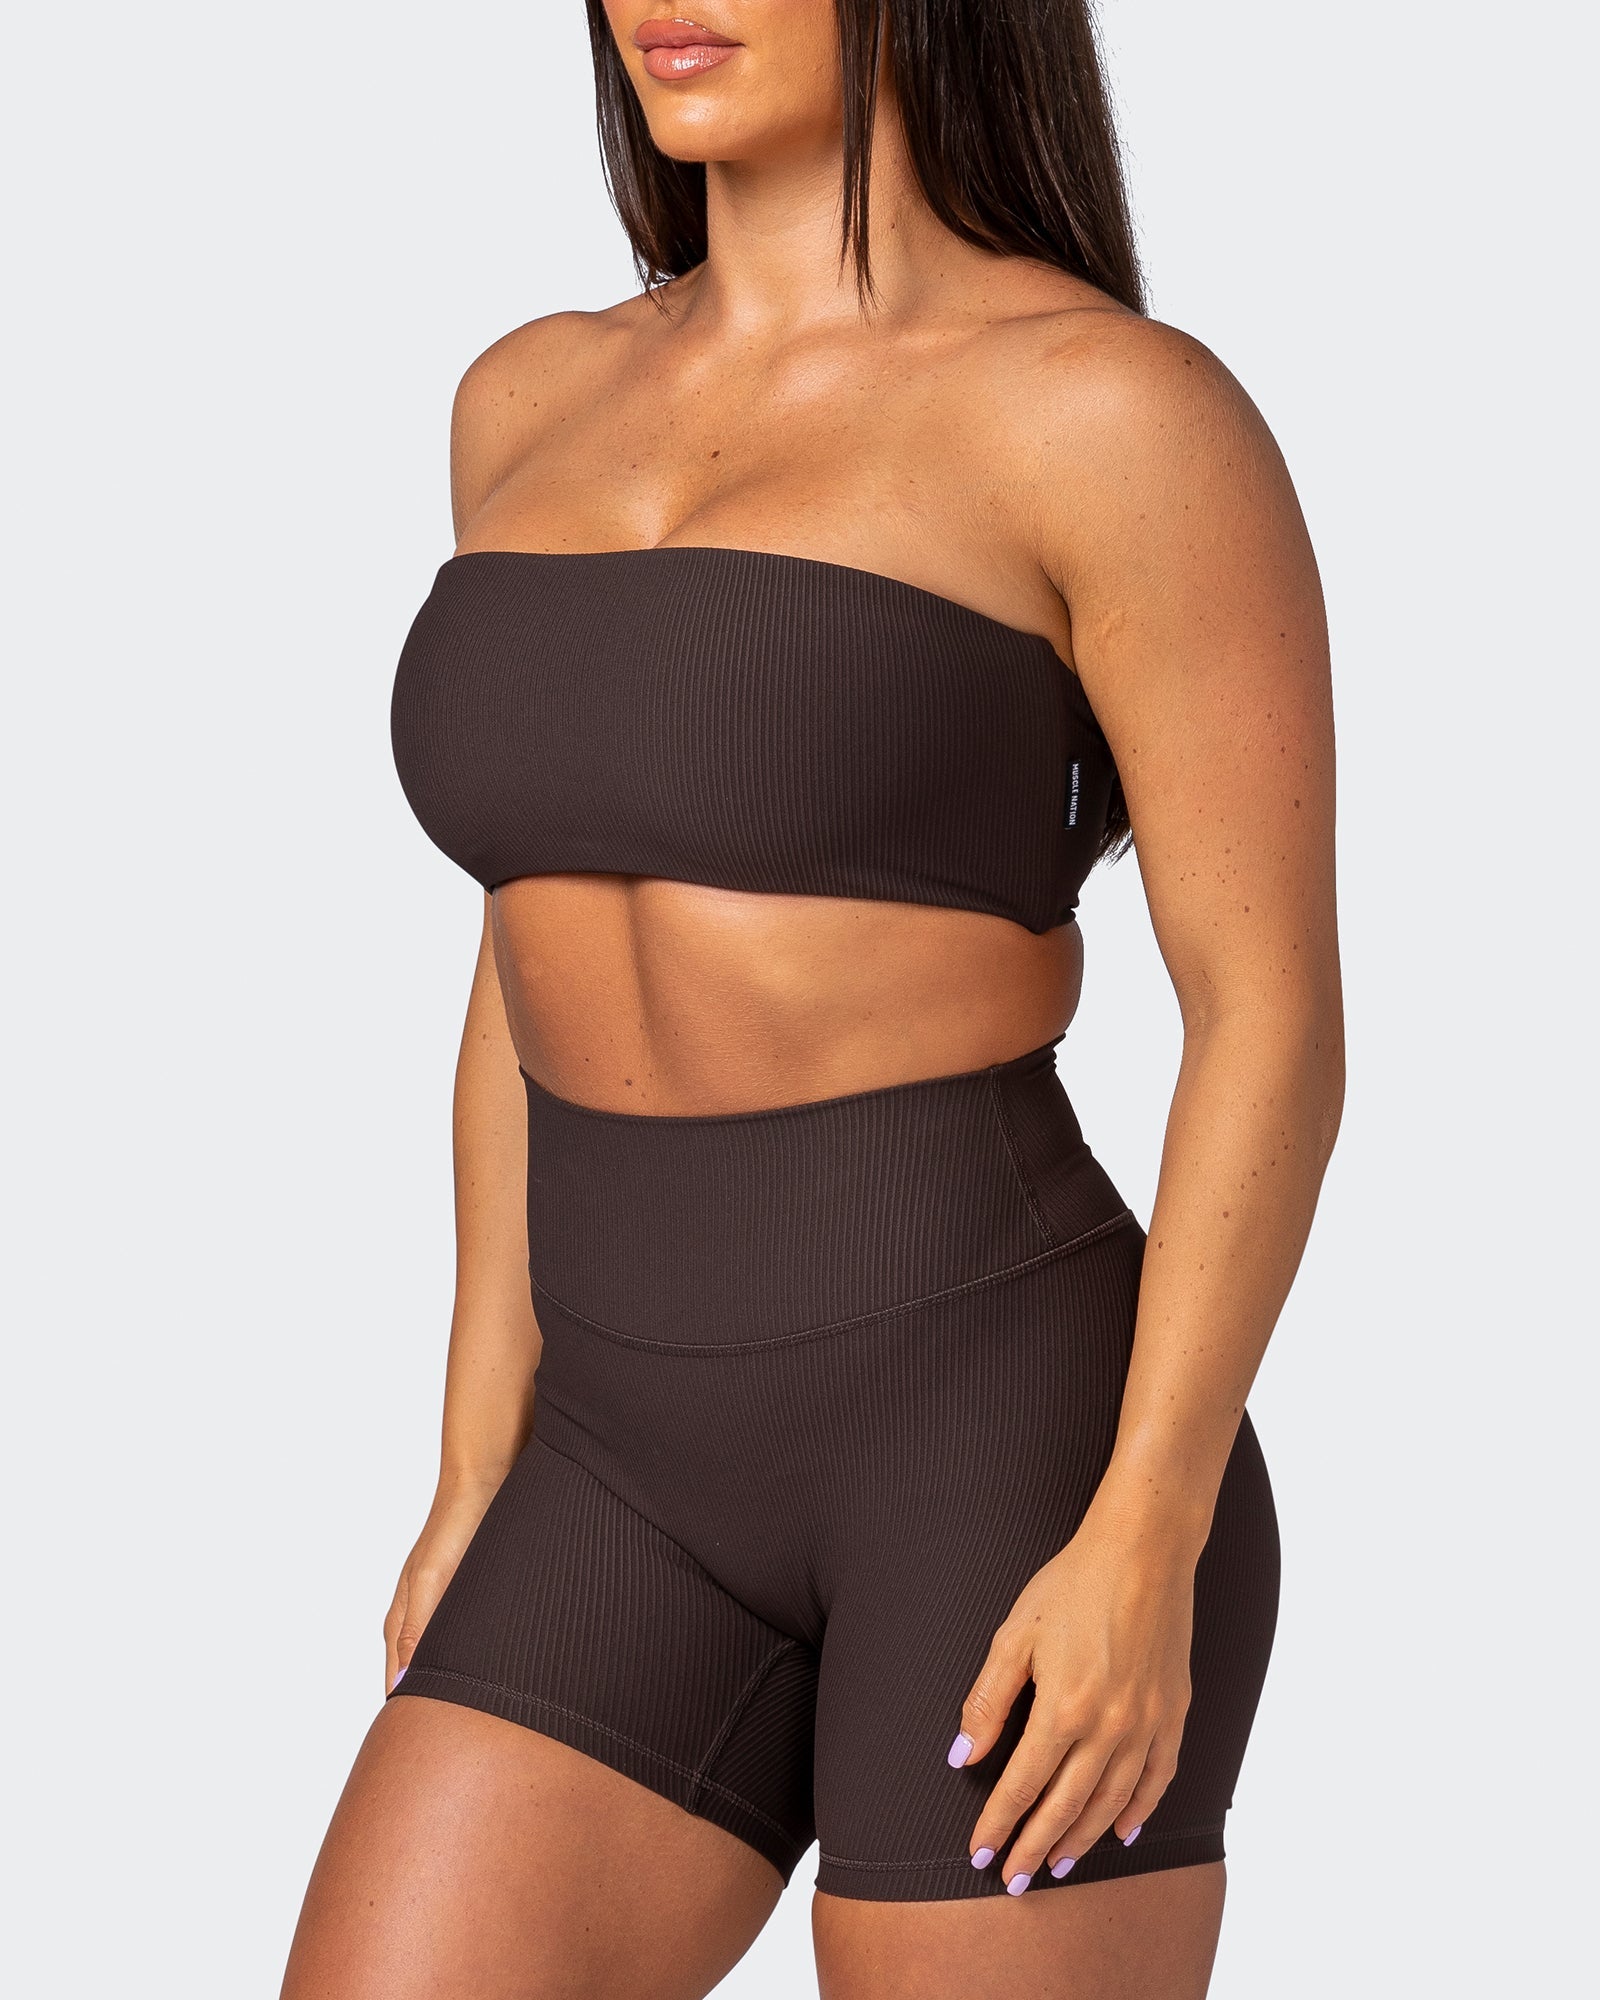 musclenation Sports Bras Ribbed Bandeau - Cocoa